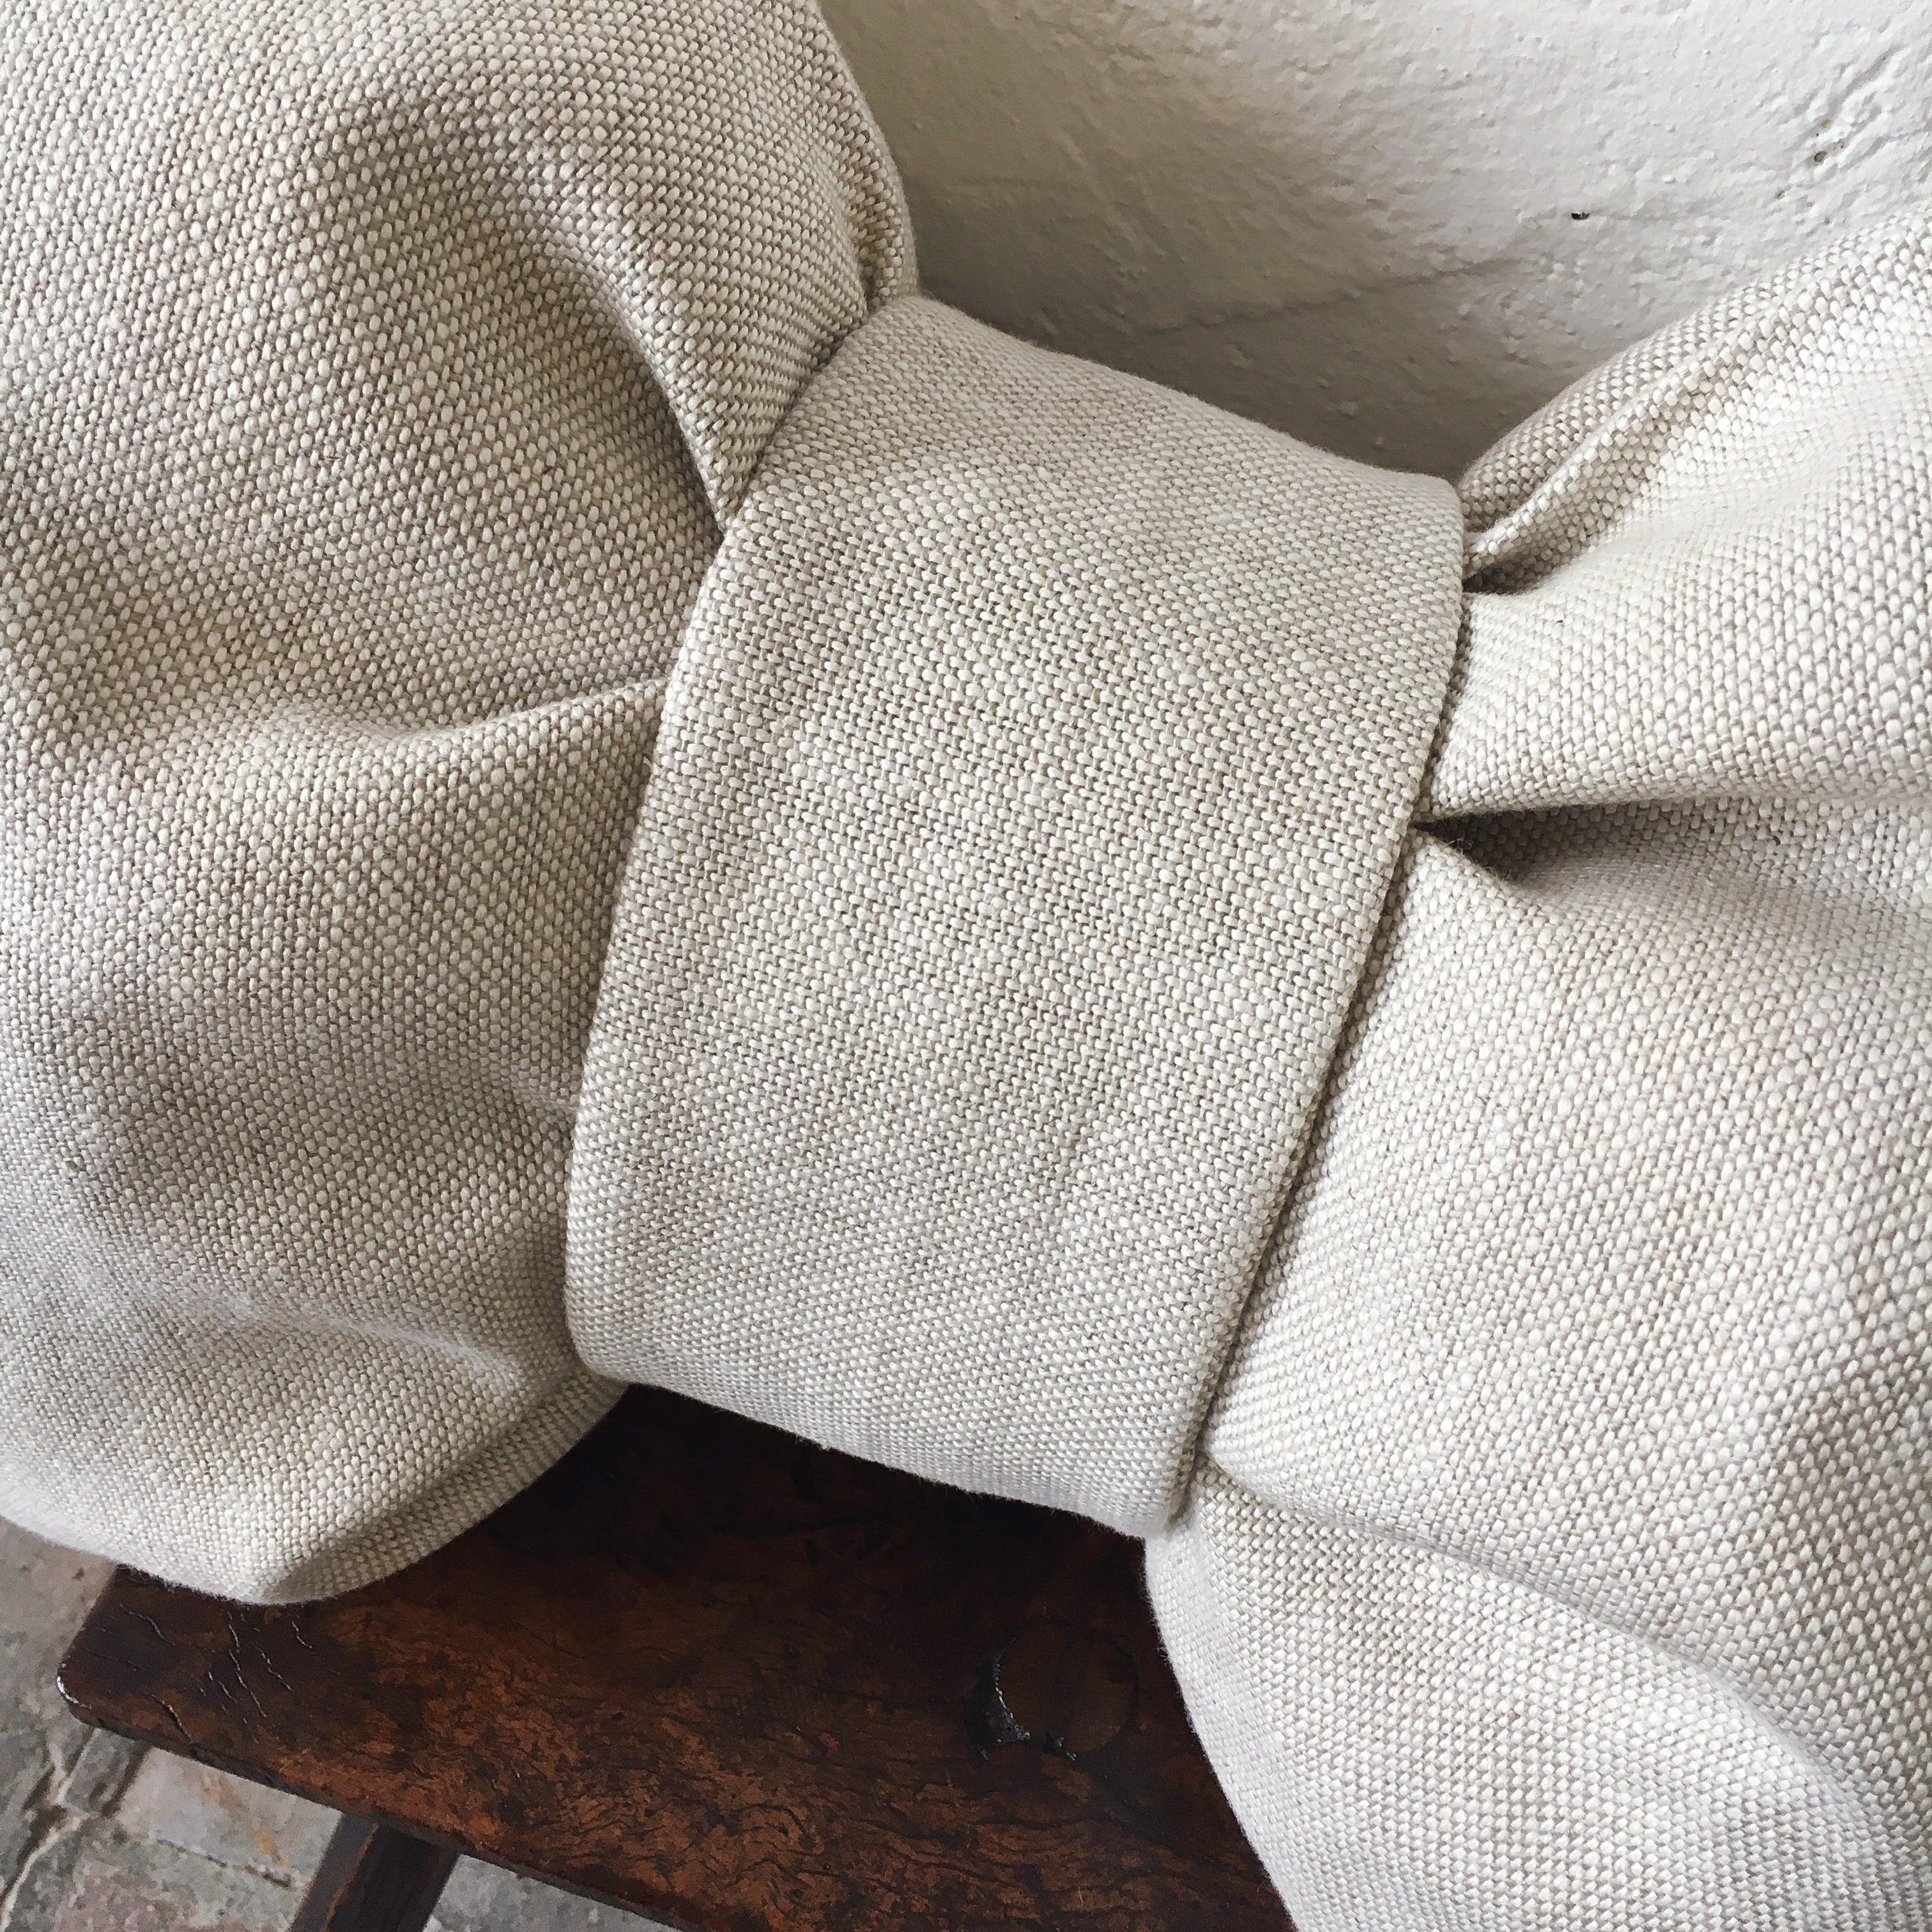 A custom-made contemporary luxury cushion (pillow) constructed from 100% pure Irish linen made from the flax plant, the Aristocrat of textiles, and certified by the Irish Linen Guild. The vintage cloth is from an unused roll, is heavy weight, of the